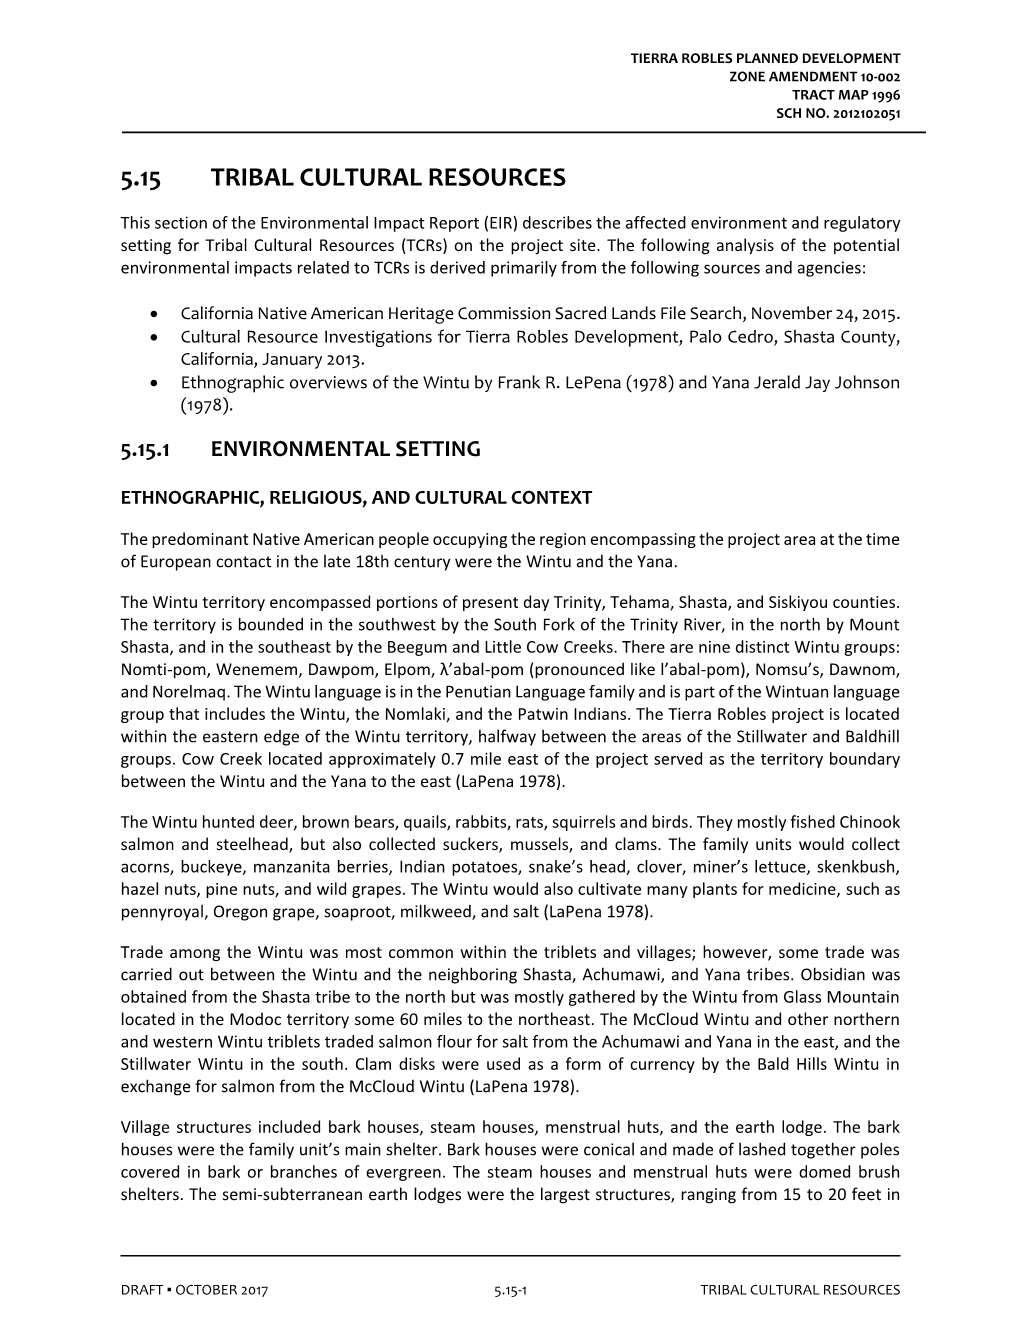 5.15 Tribal Cultural Resources